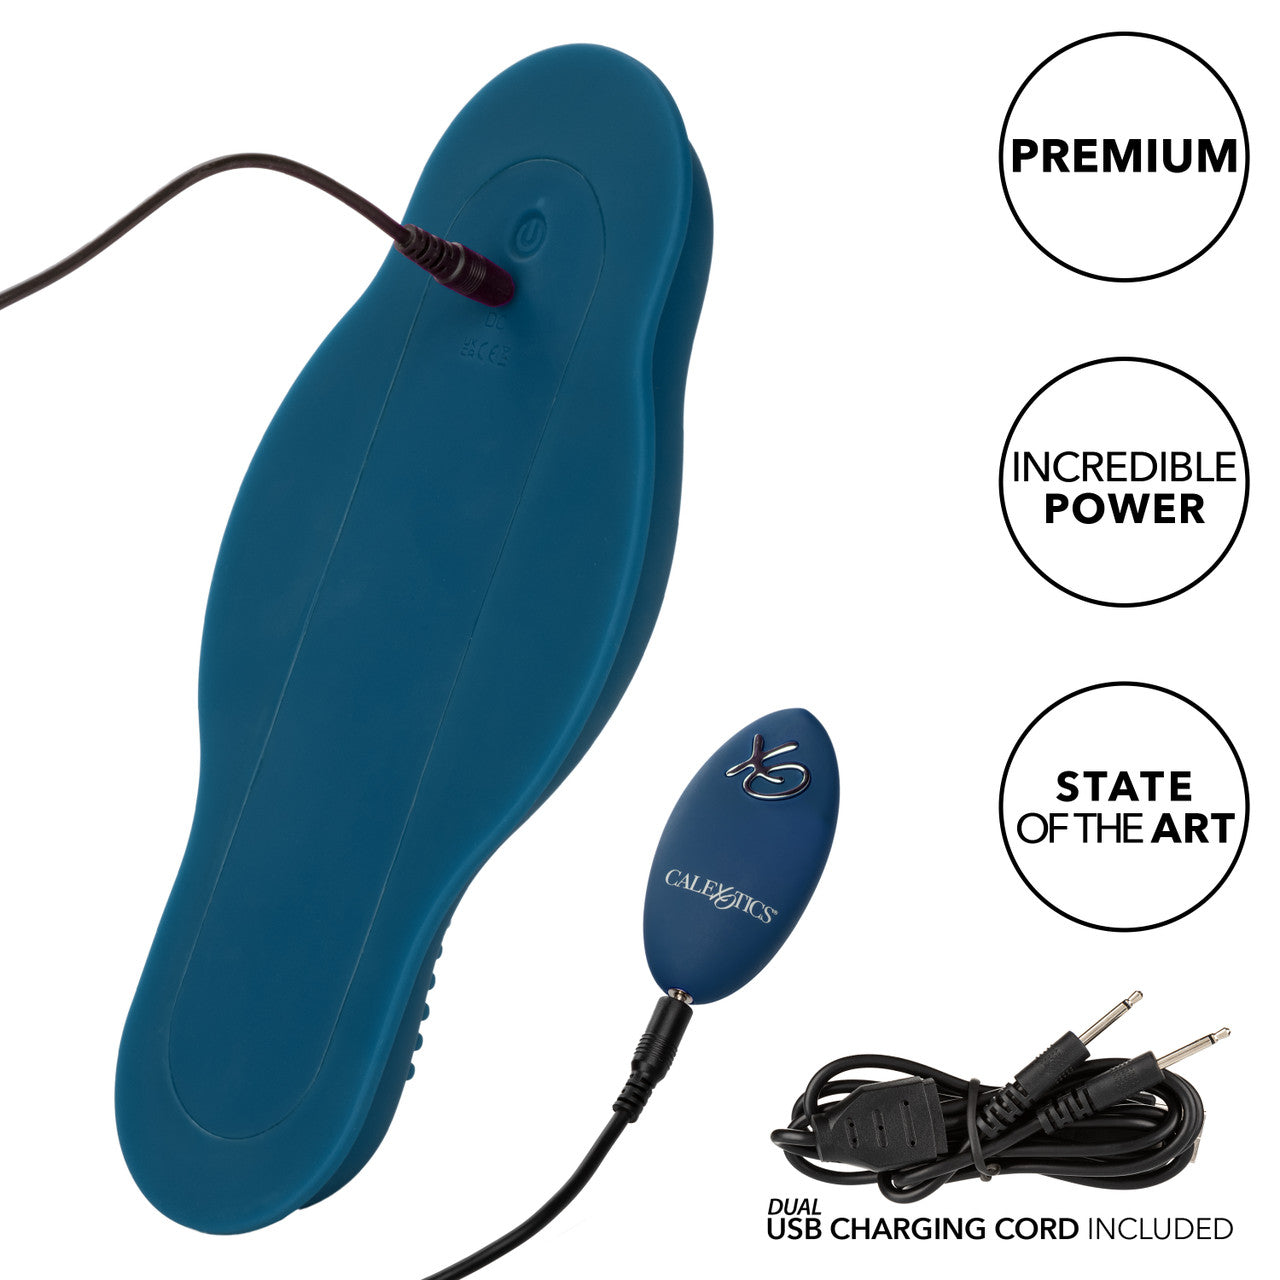 Dual Rider Remote Control Bump and Grind Massager